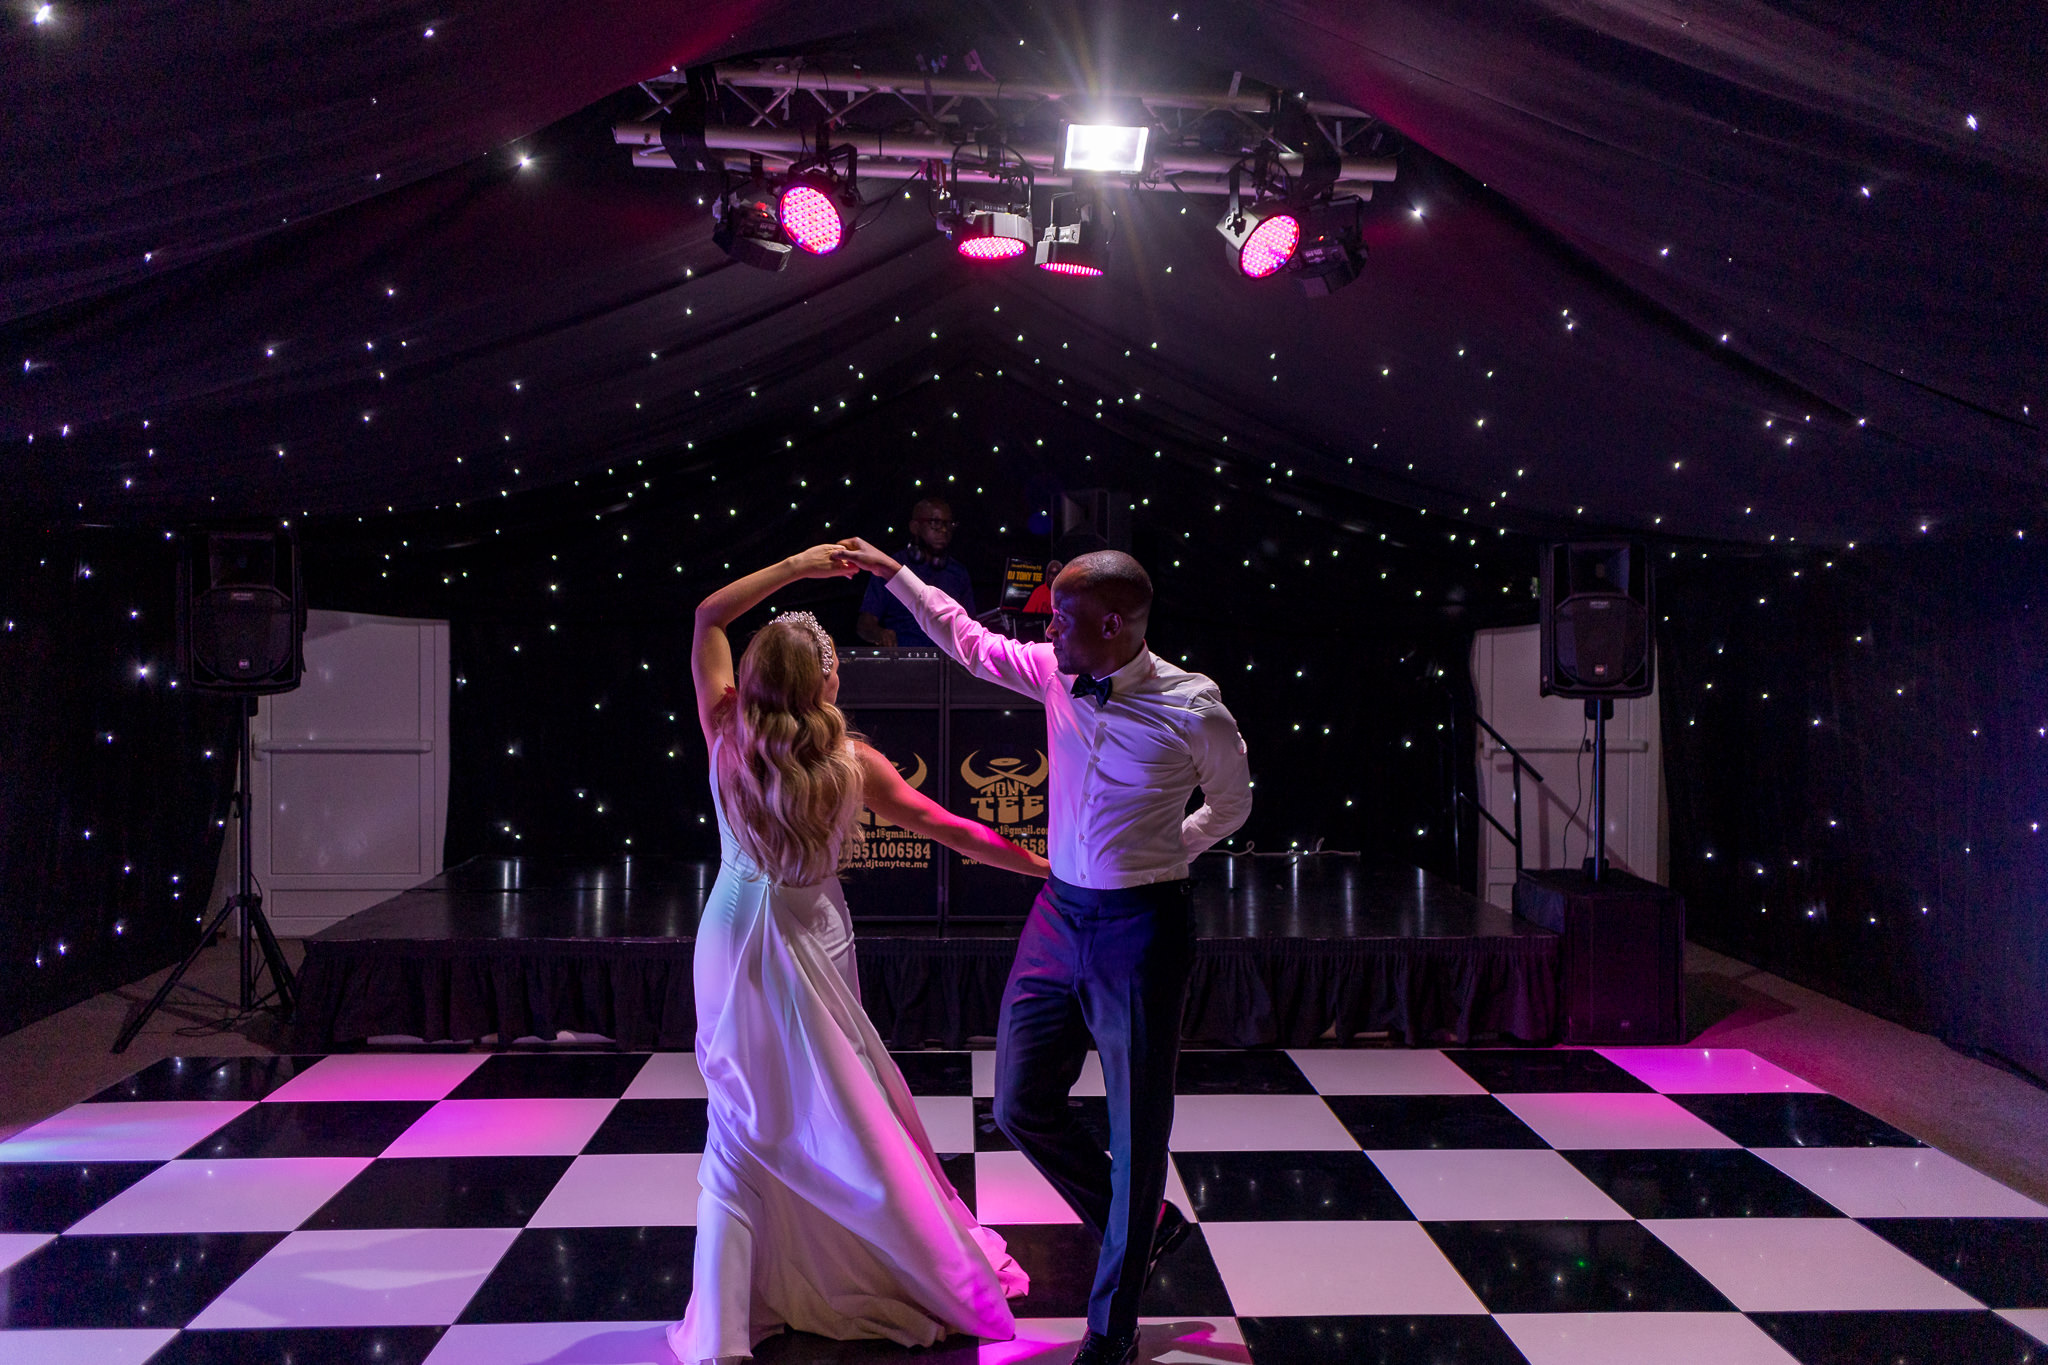 Modern twists on the dance floor by the married couple